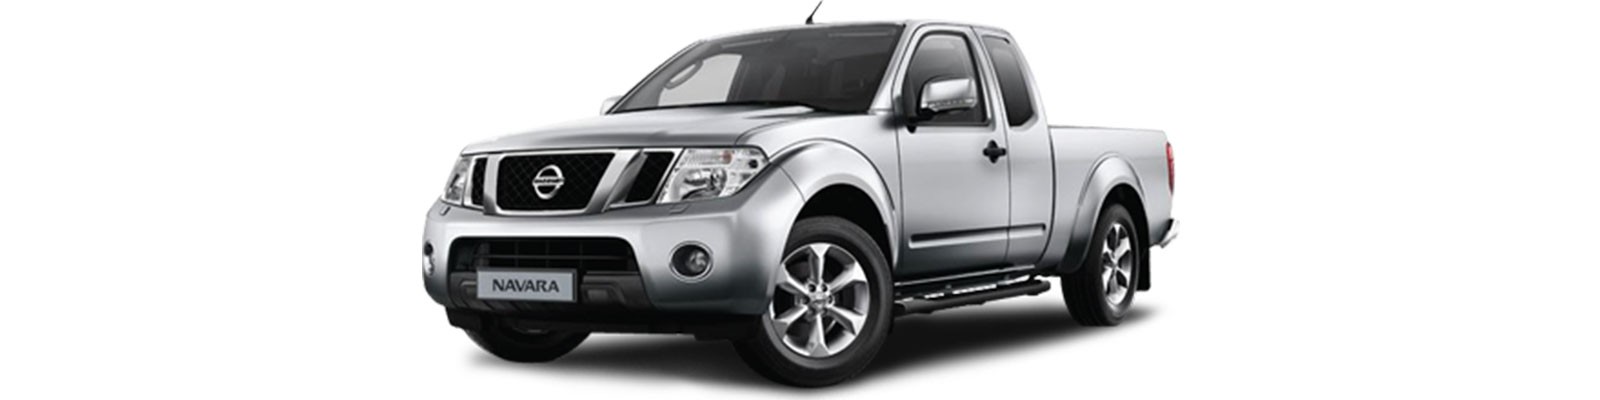 Accessories For Nissan D40 Navara King Cab From 2005 To 2010